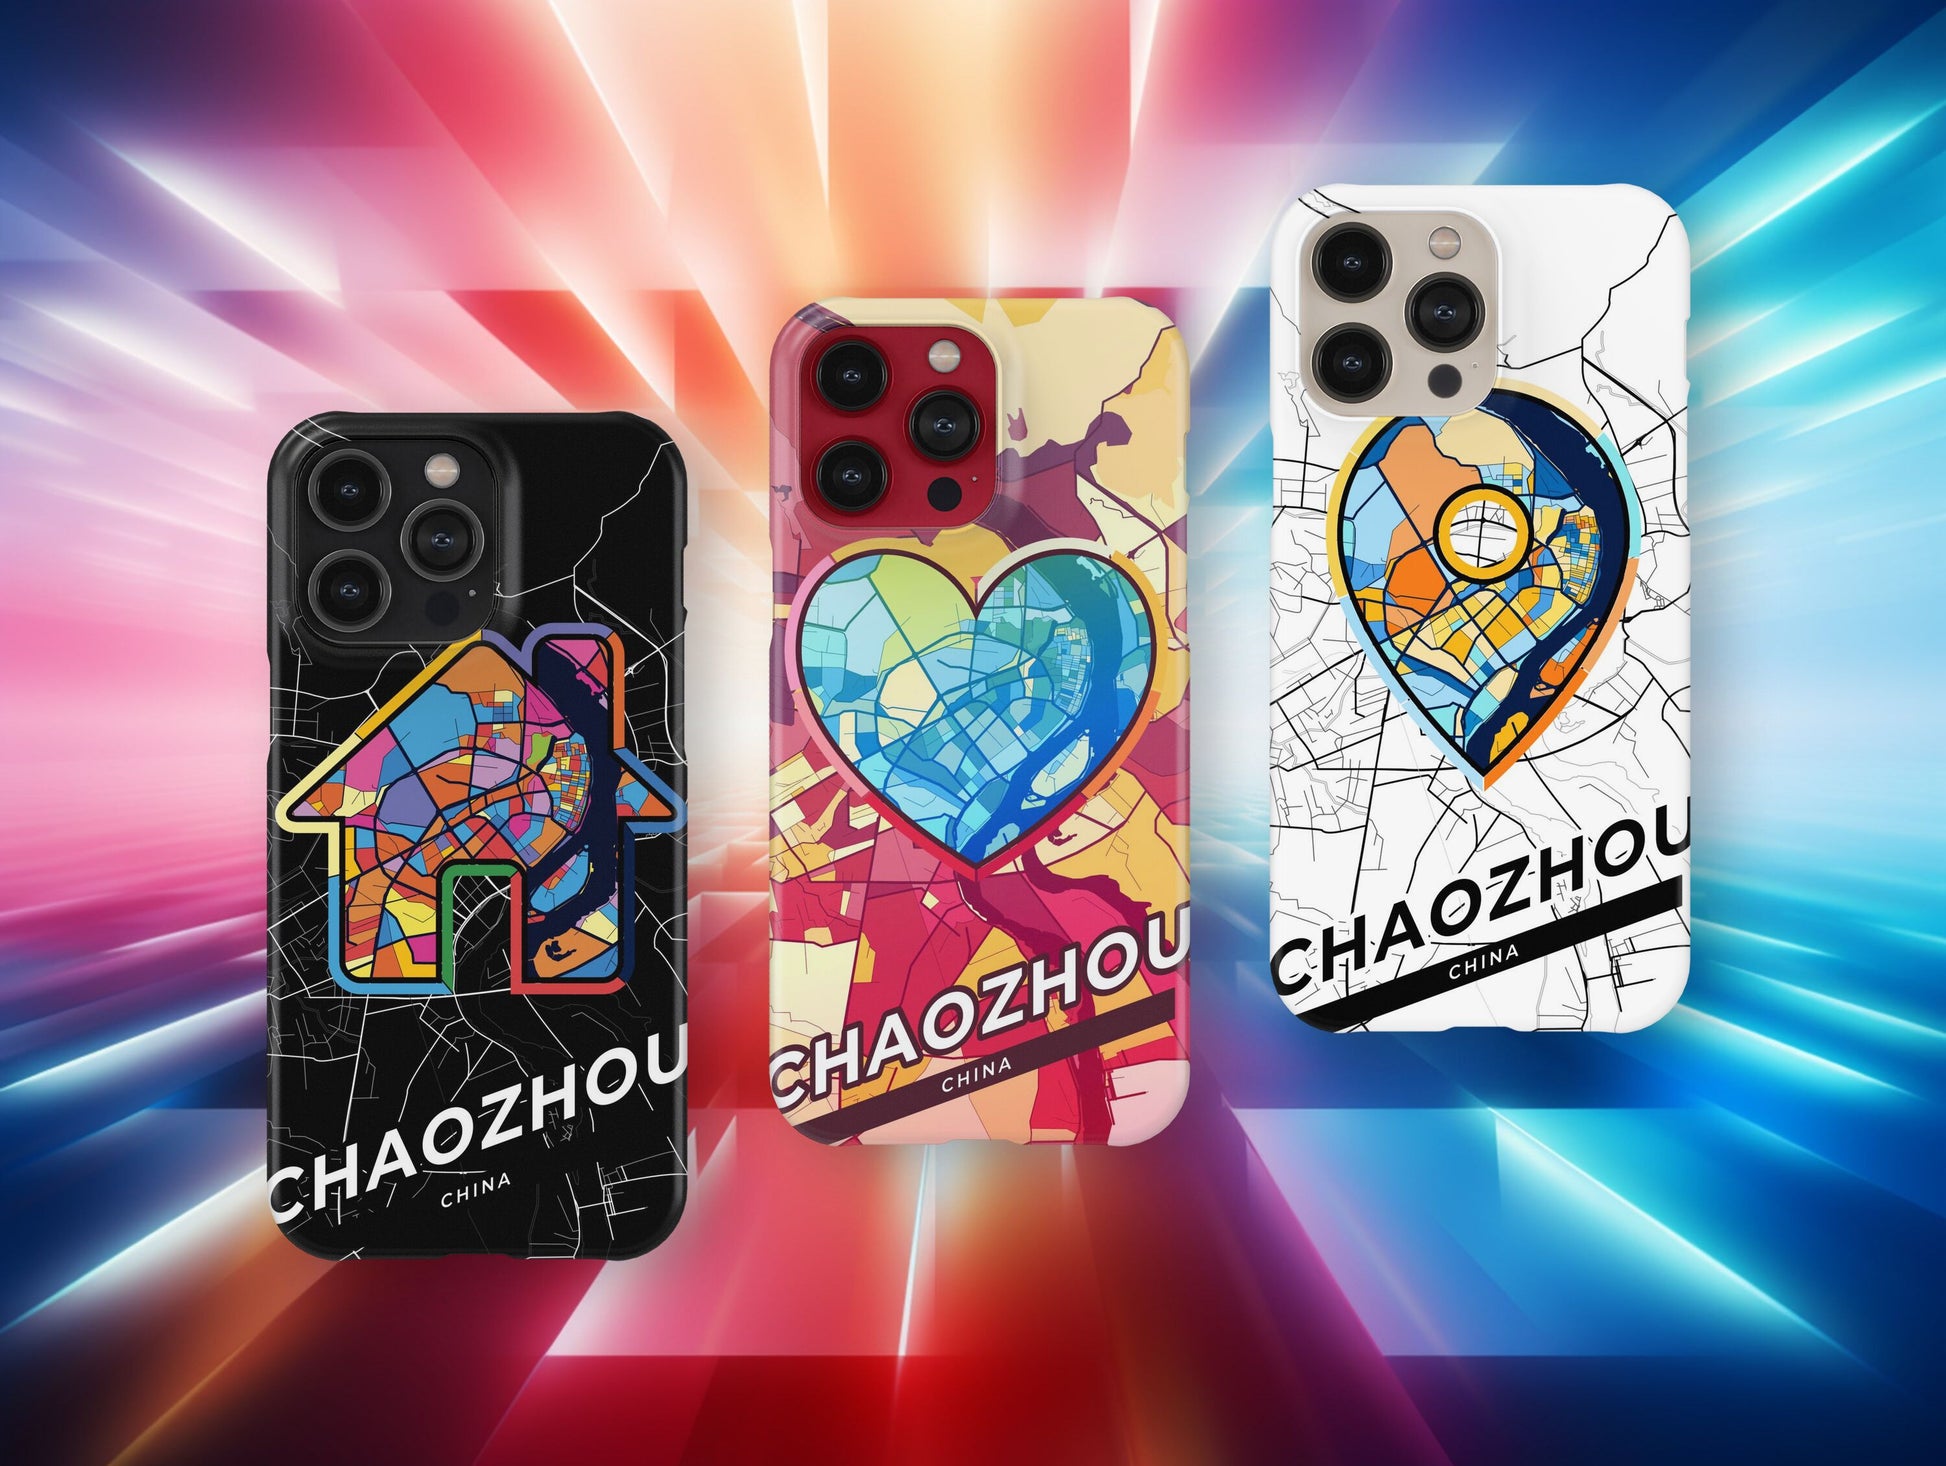 Chaozhou China slim phone case with colorful icon. Birthday, wedding or housewarming gift. Couple match cases.